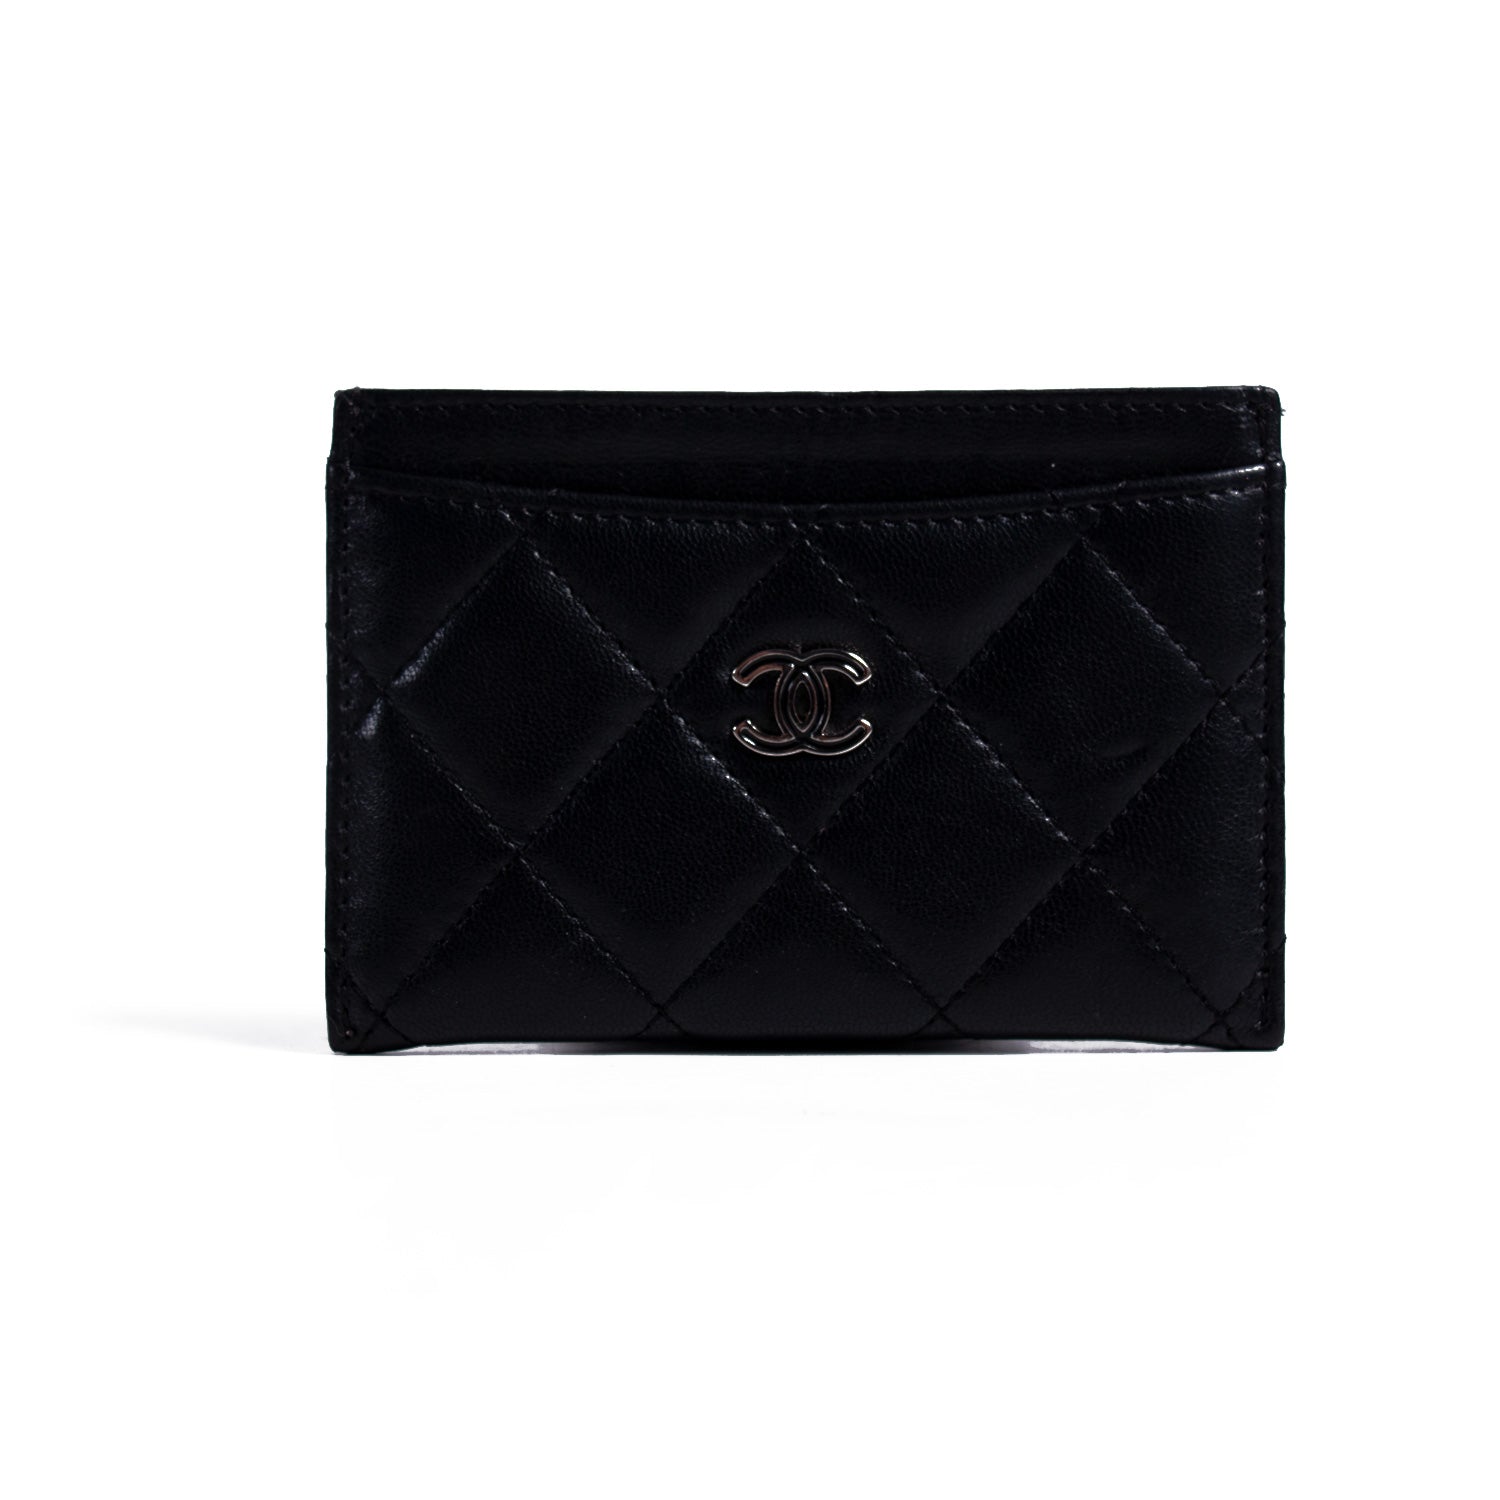 Shop authentic Chanel CC Card Holder at revogue for just USD 355.00